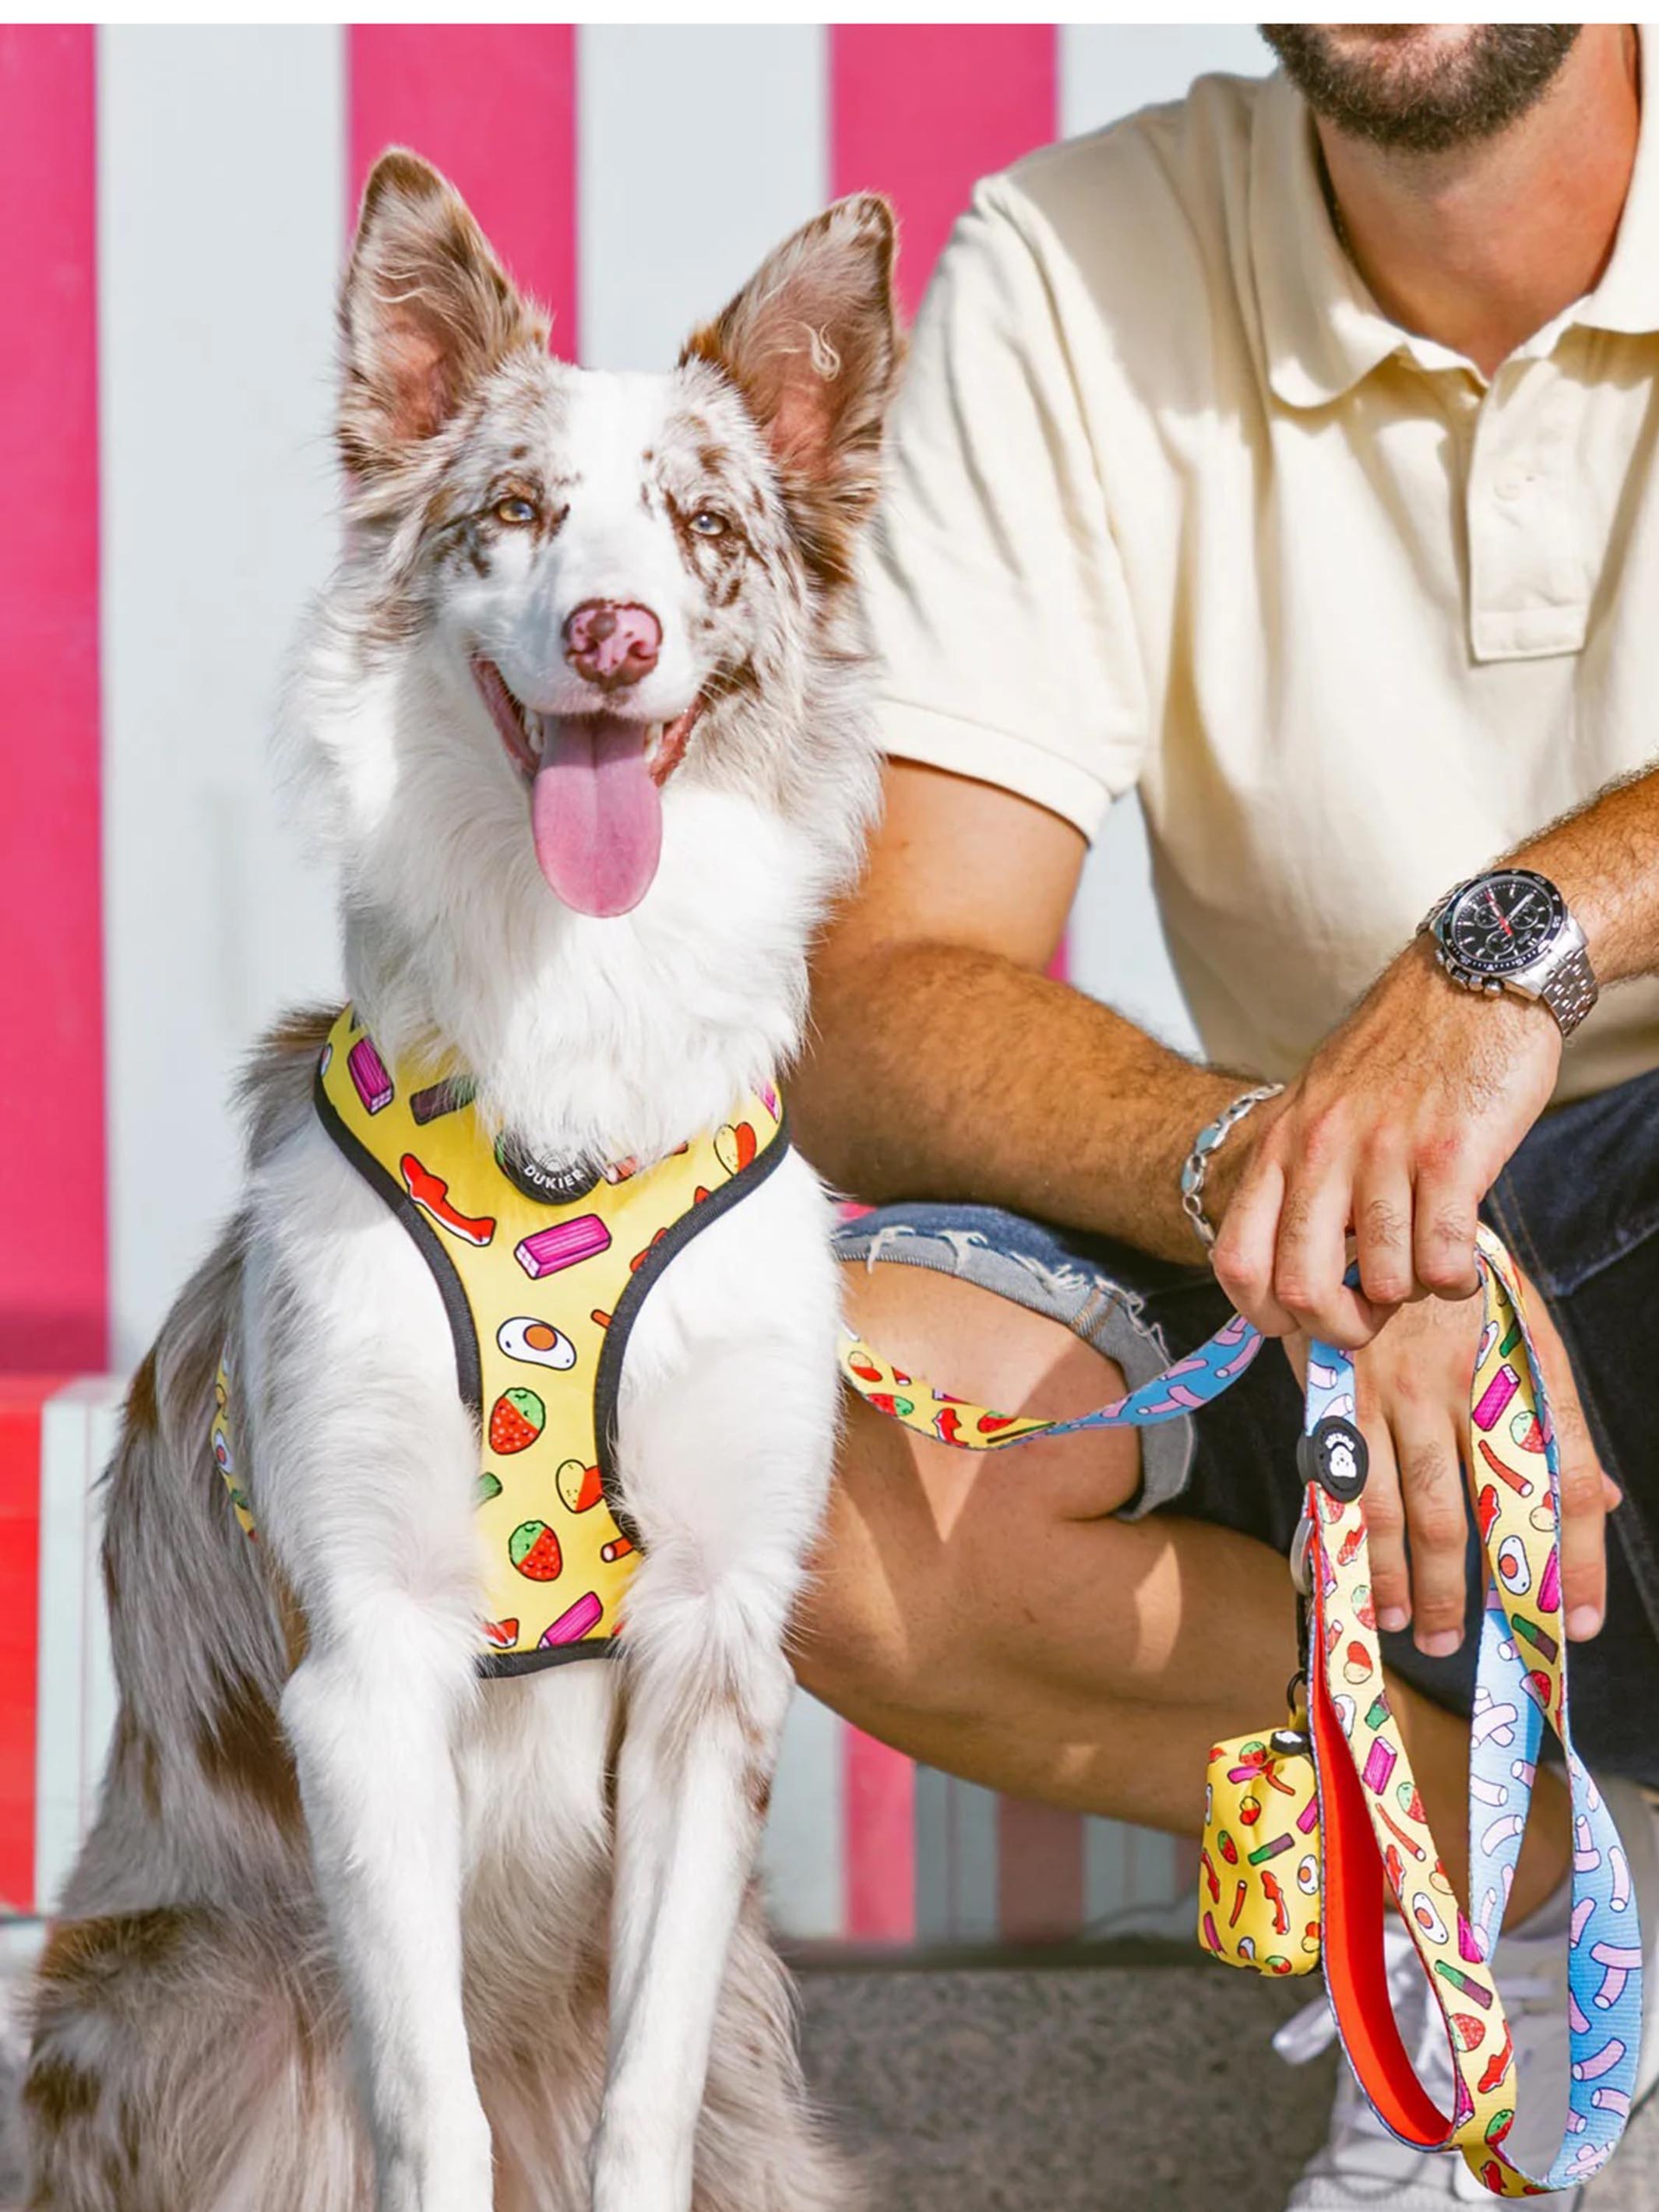 SWEETS REVERSIBLE DOG HARNESS